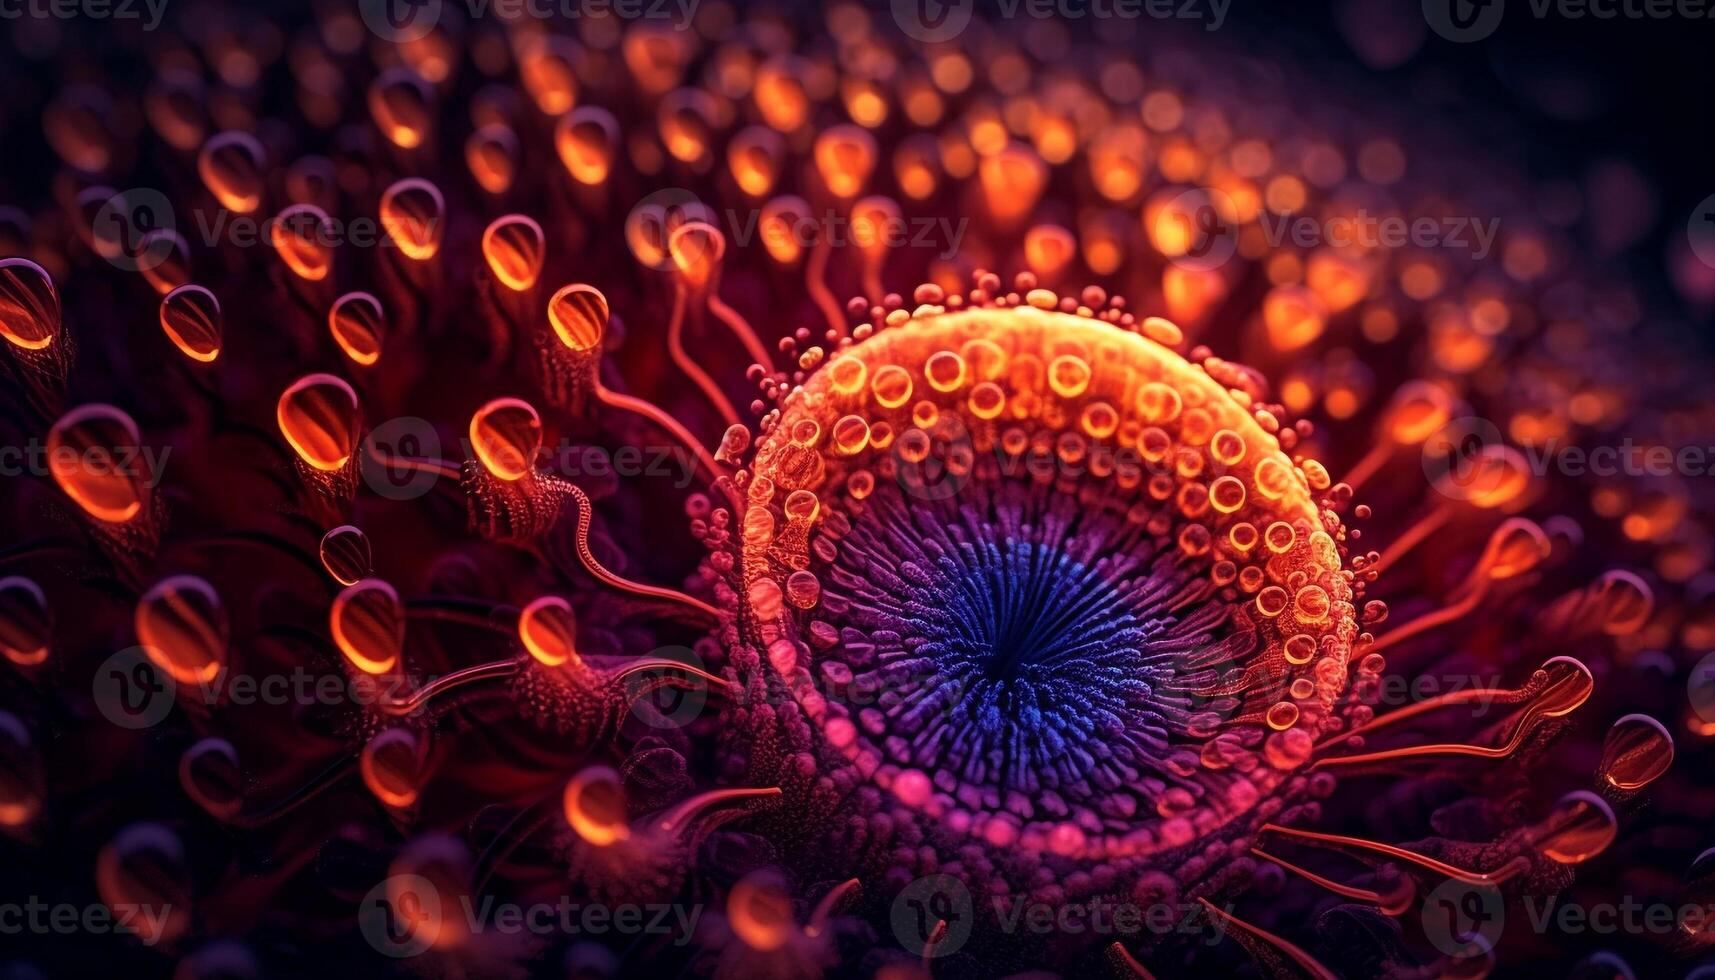 Bacterium, virus and cancer cell magnified abstractly generated by AI photo